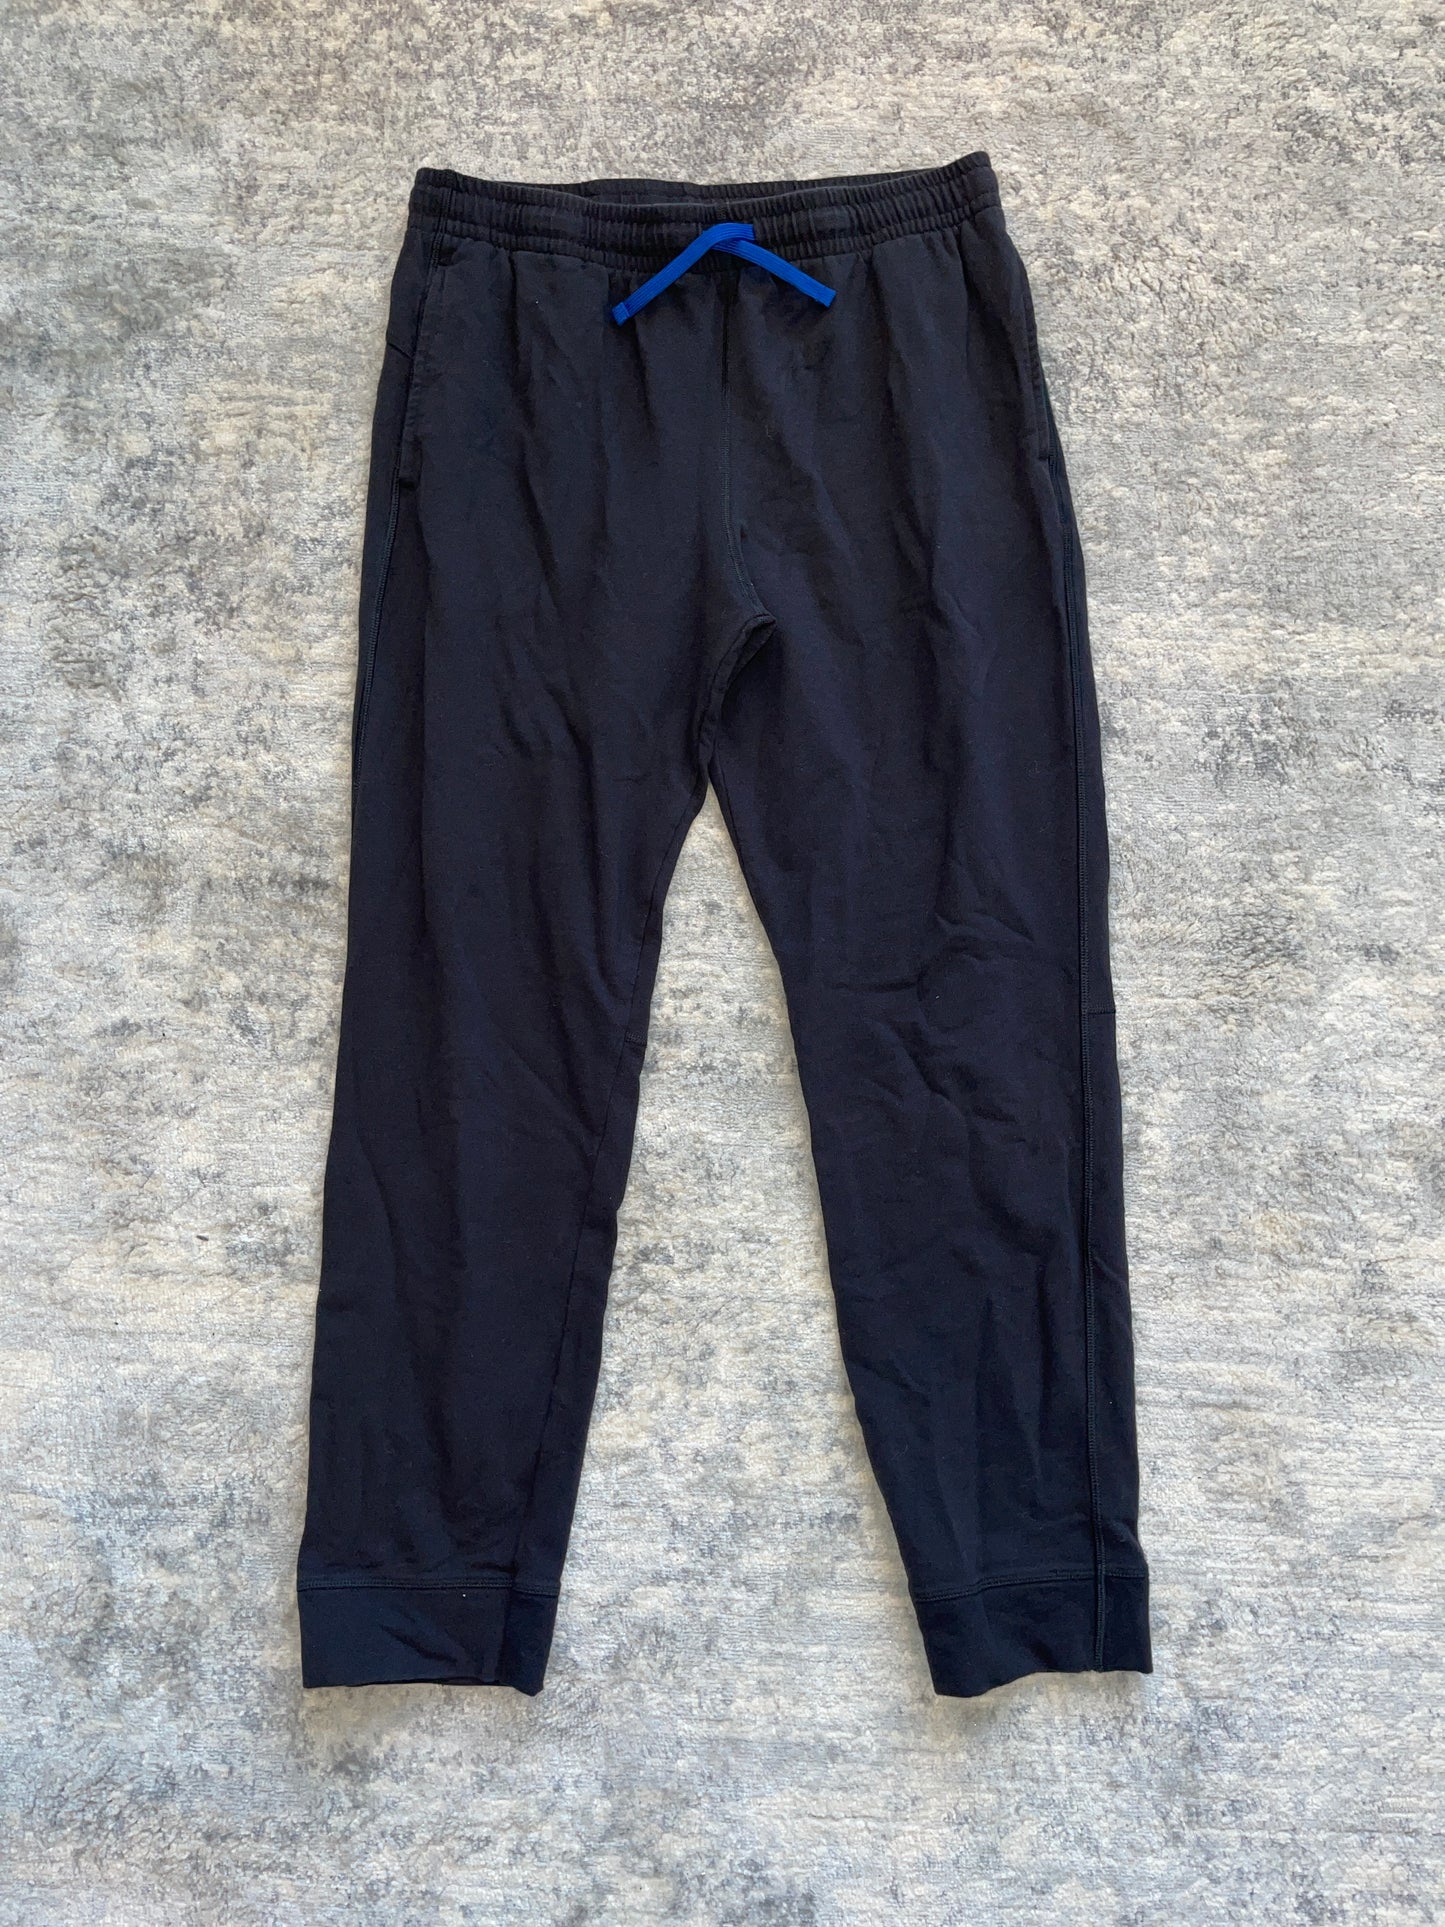 All In Motion Boys Black Jogger Pants XXL (16/18)- PPU Montgomery